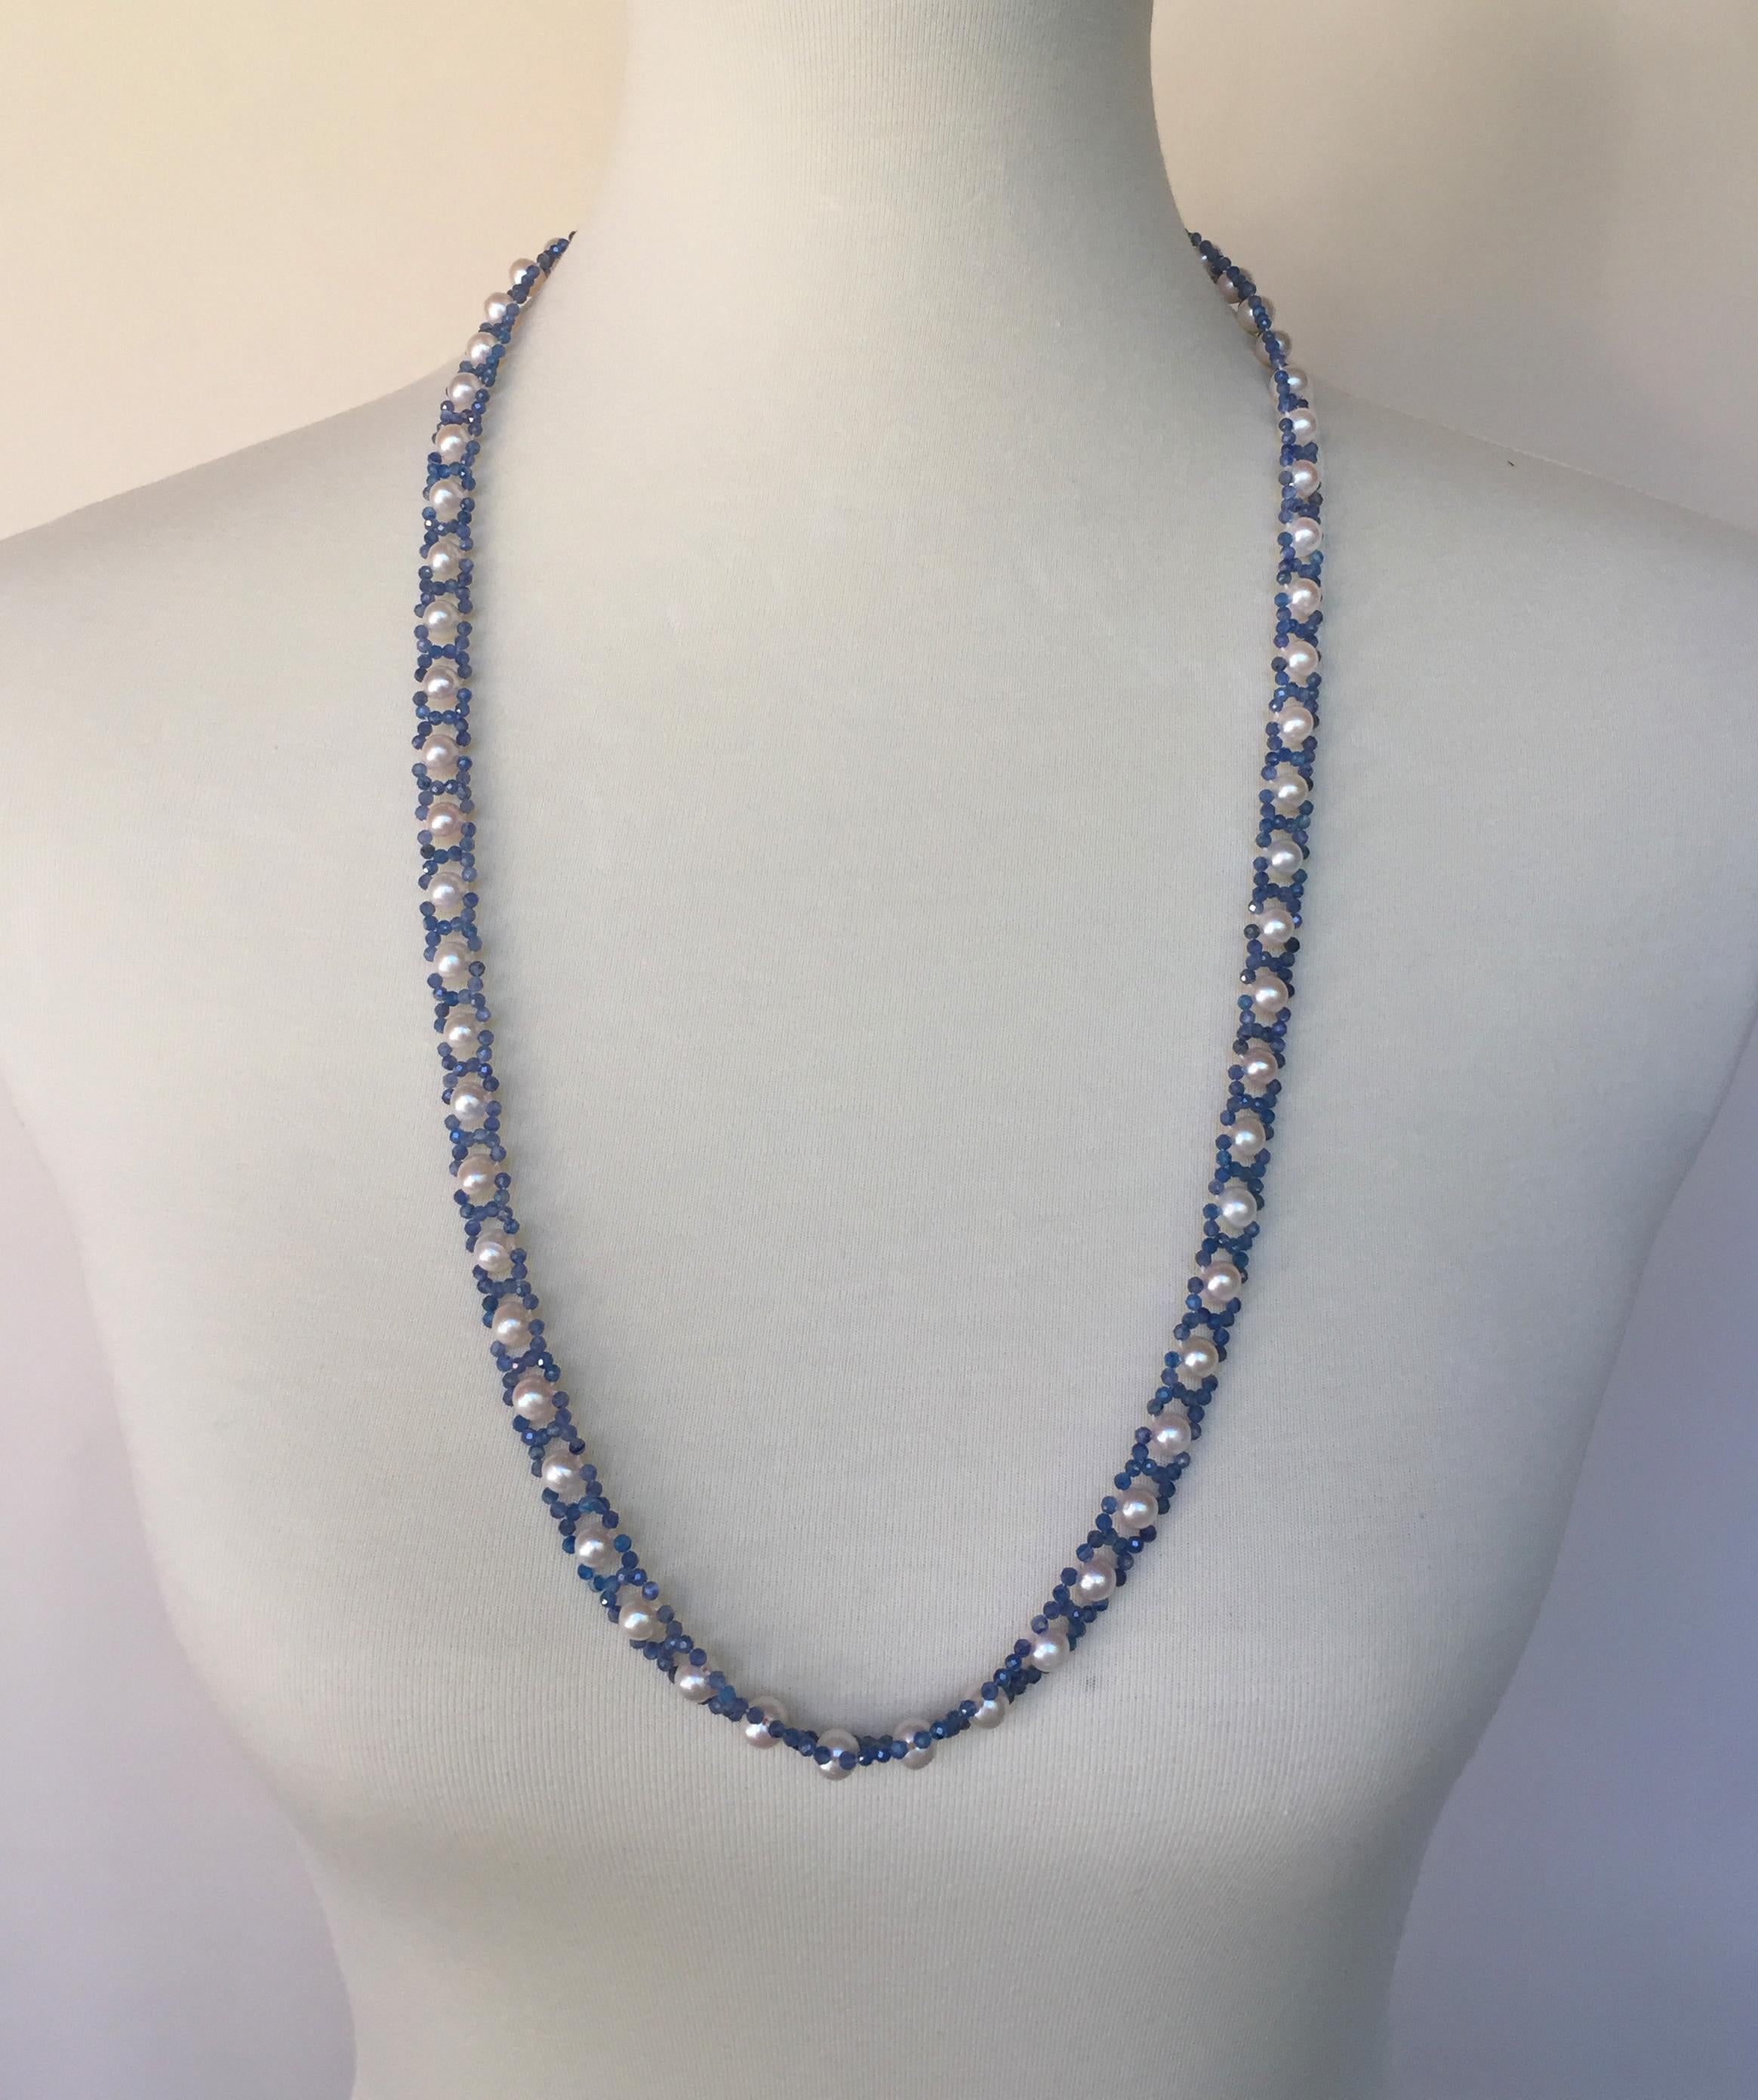 This white pearl and blue kyanite  sautoir necklace has a removable tassel and 14k yellow gold clip. Each white pearl in the sautoir is surrounded by beautiful blue kyanite in a ribbon like design, that is timeless and elegant. The tassel (4.5